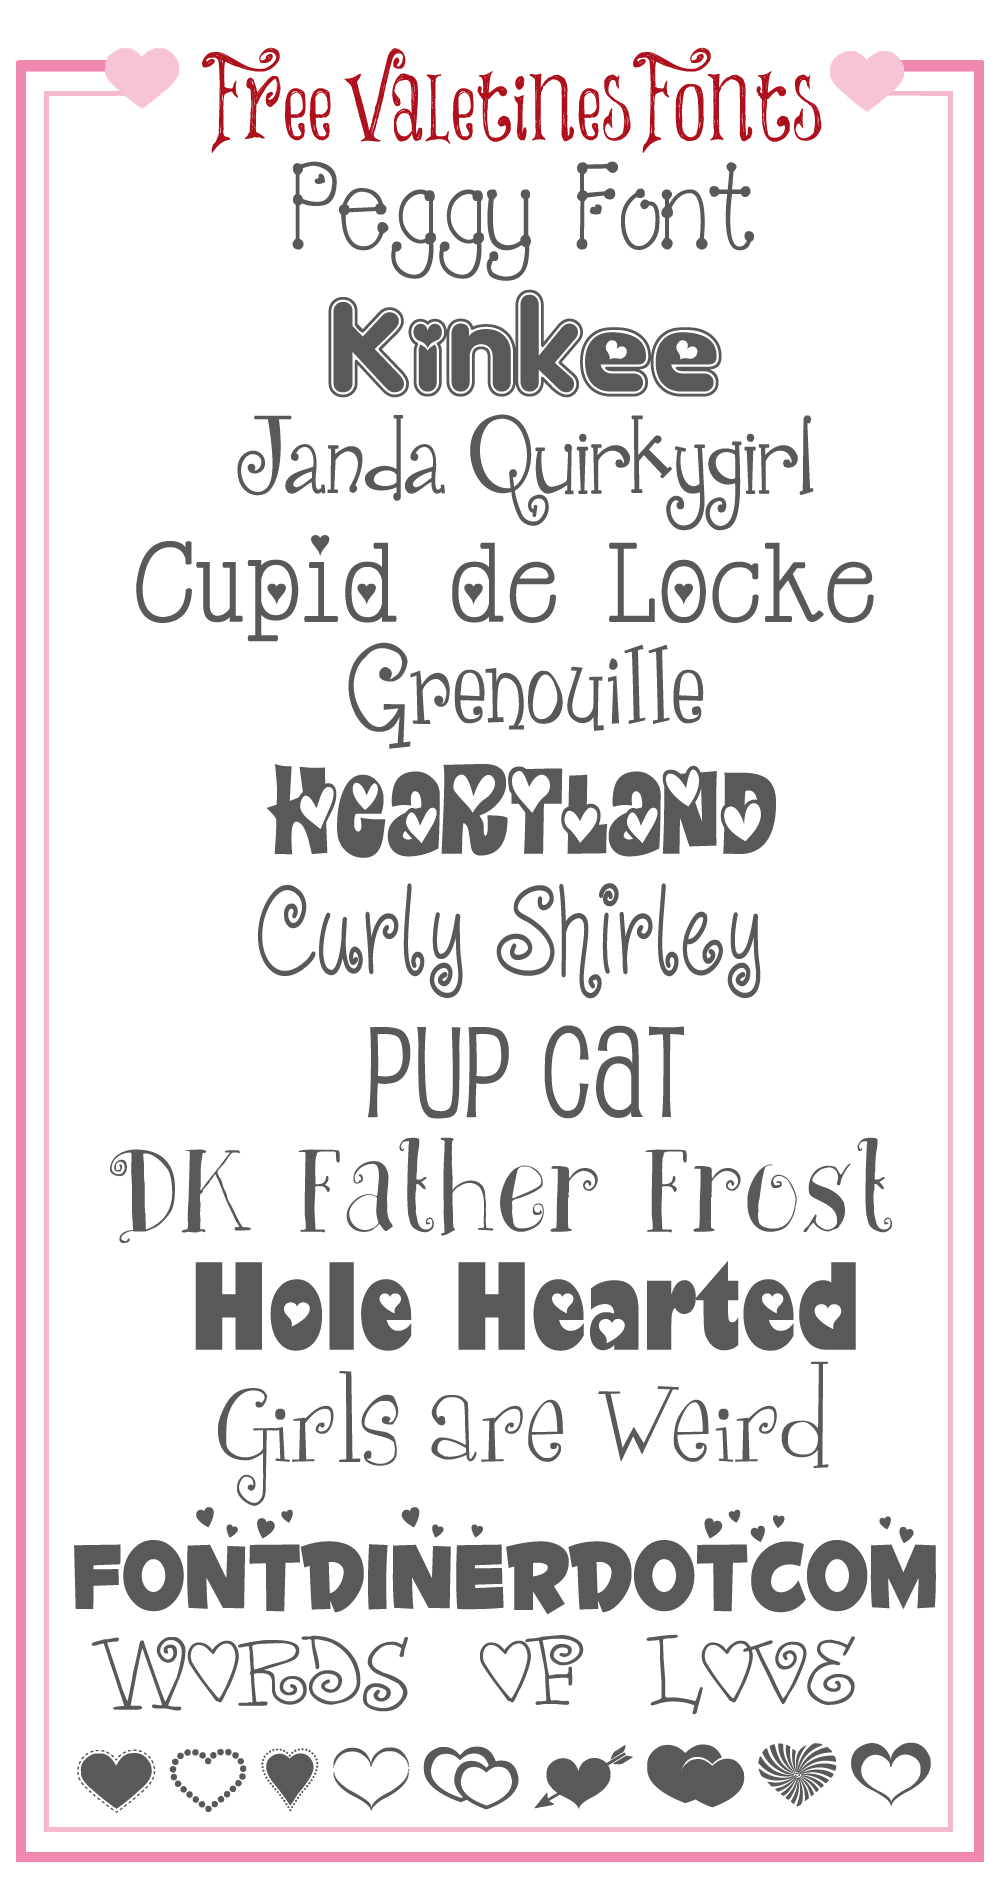 Free Valentines Fonts! - Free Printable Fonts